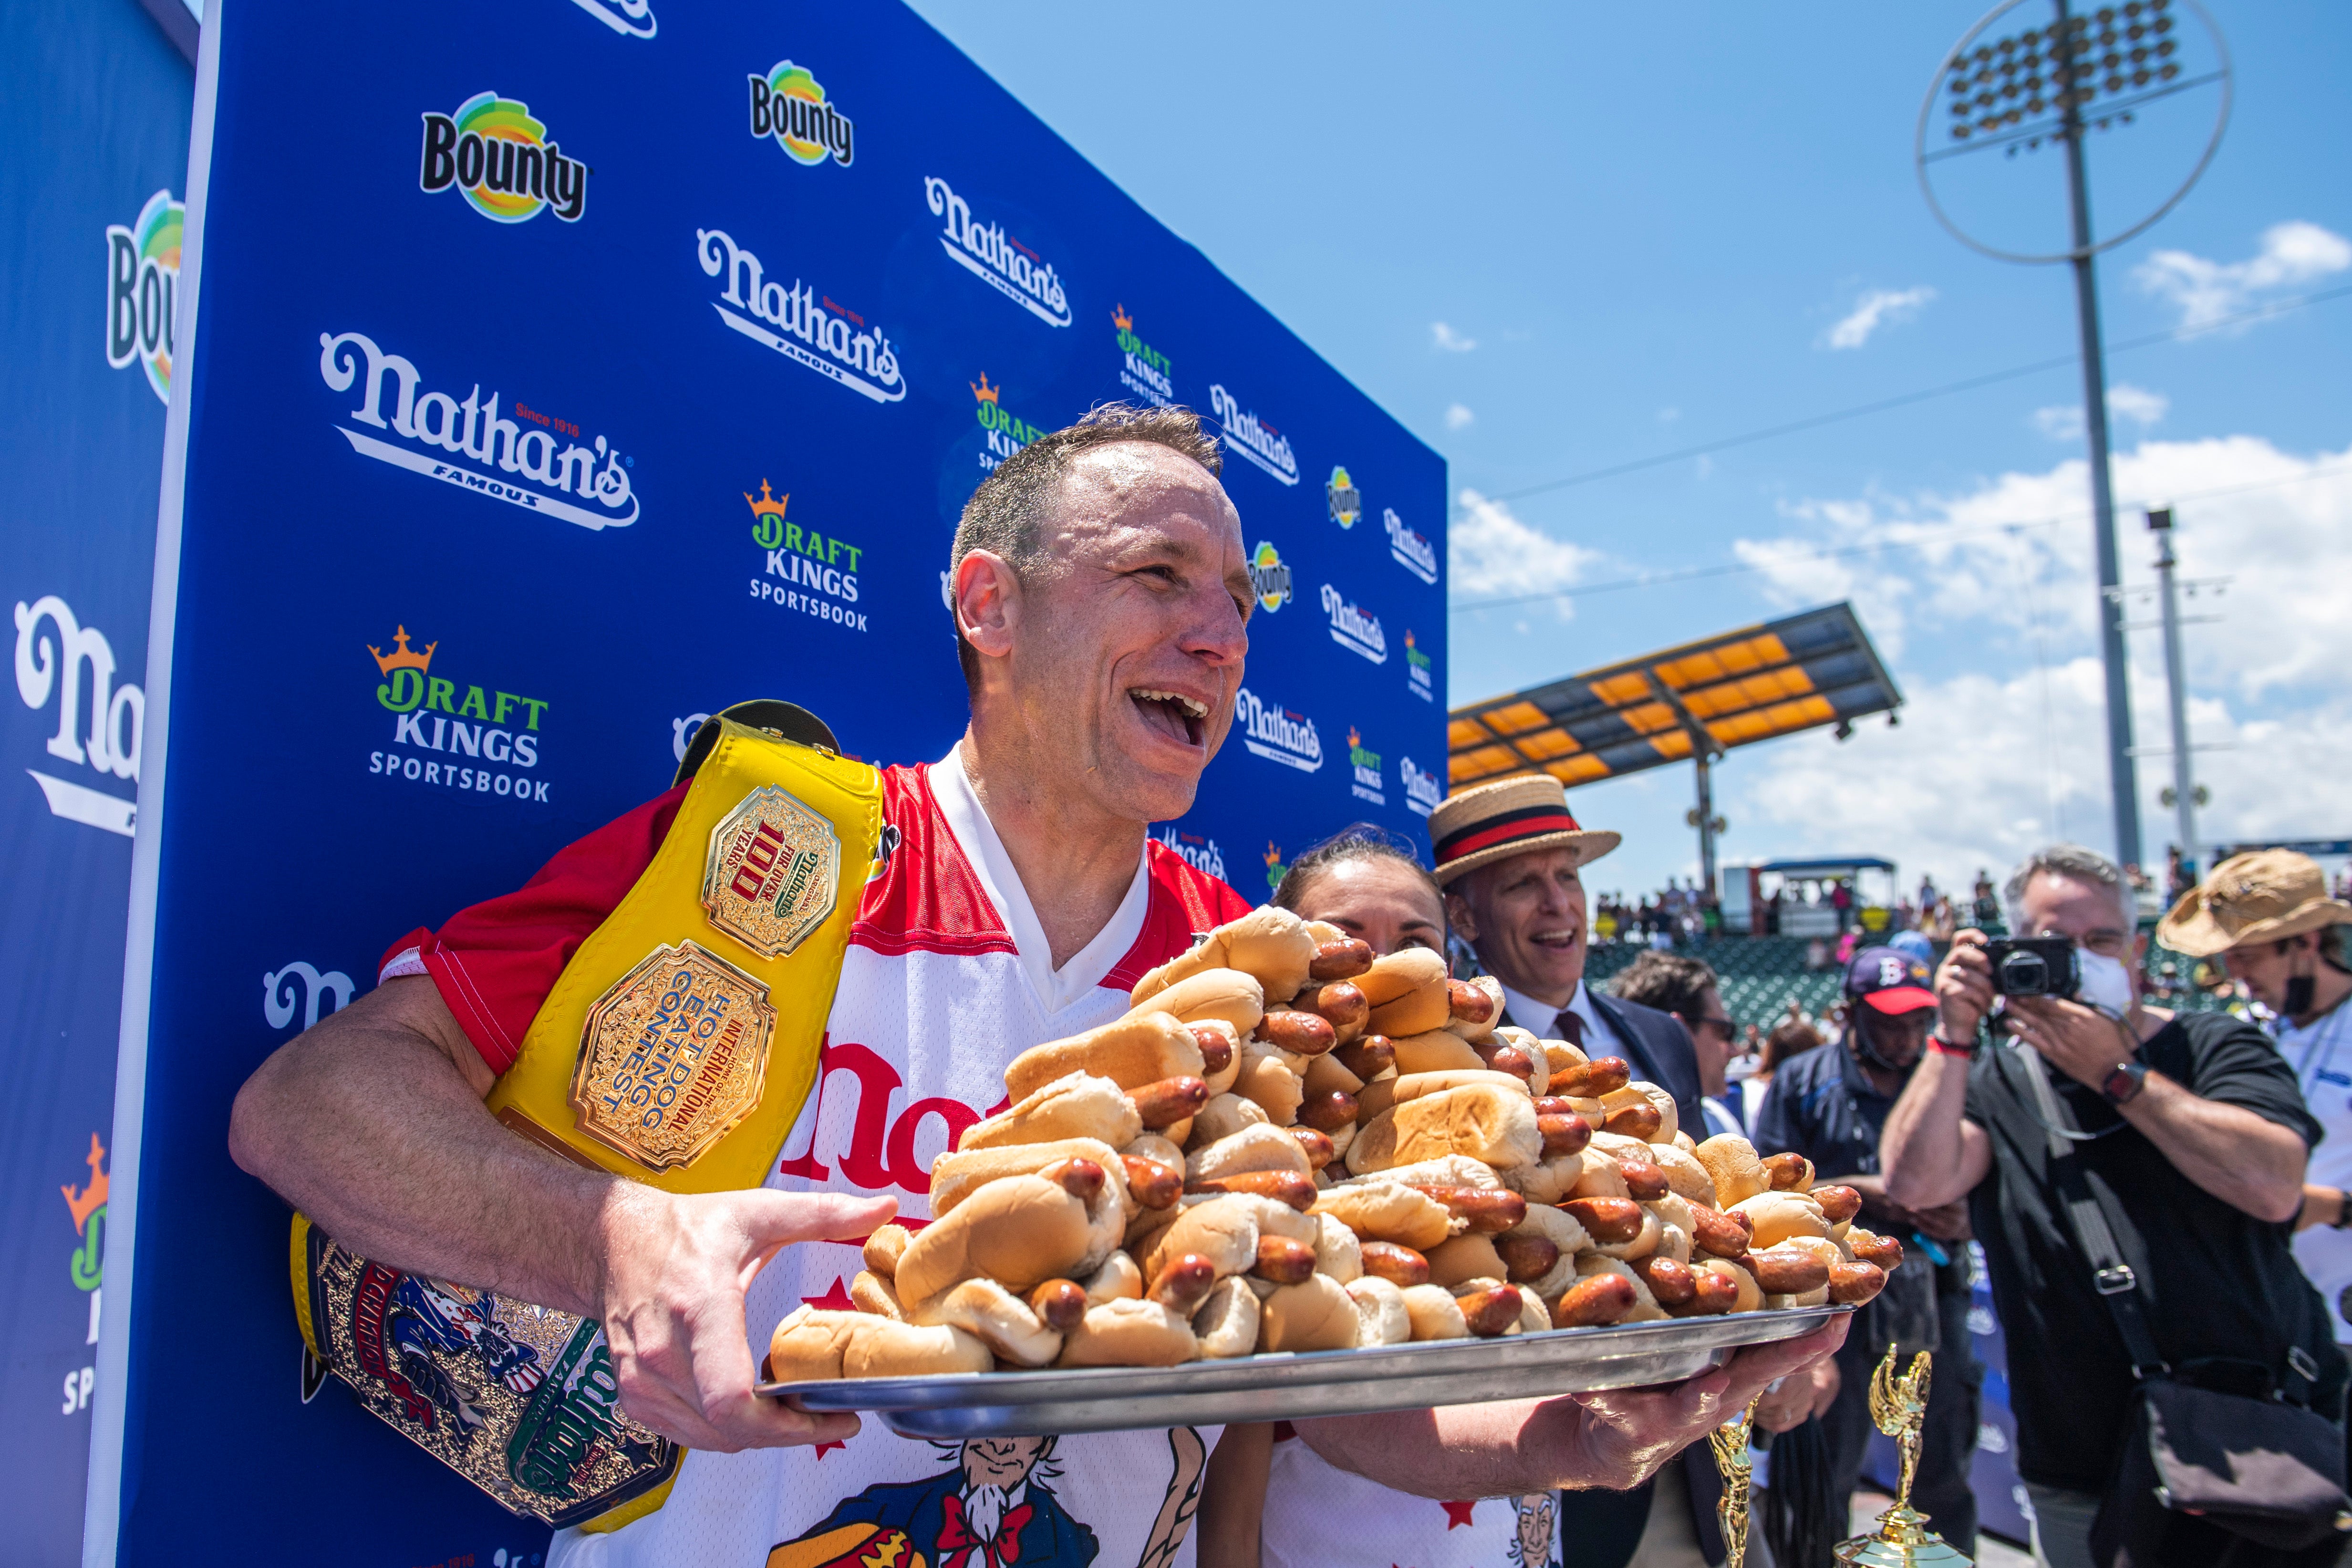 Joey Chestnut won his 14th Nathan’s Famous Hot Dog Eating Contest on Sunday